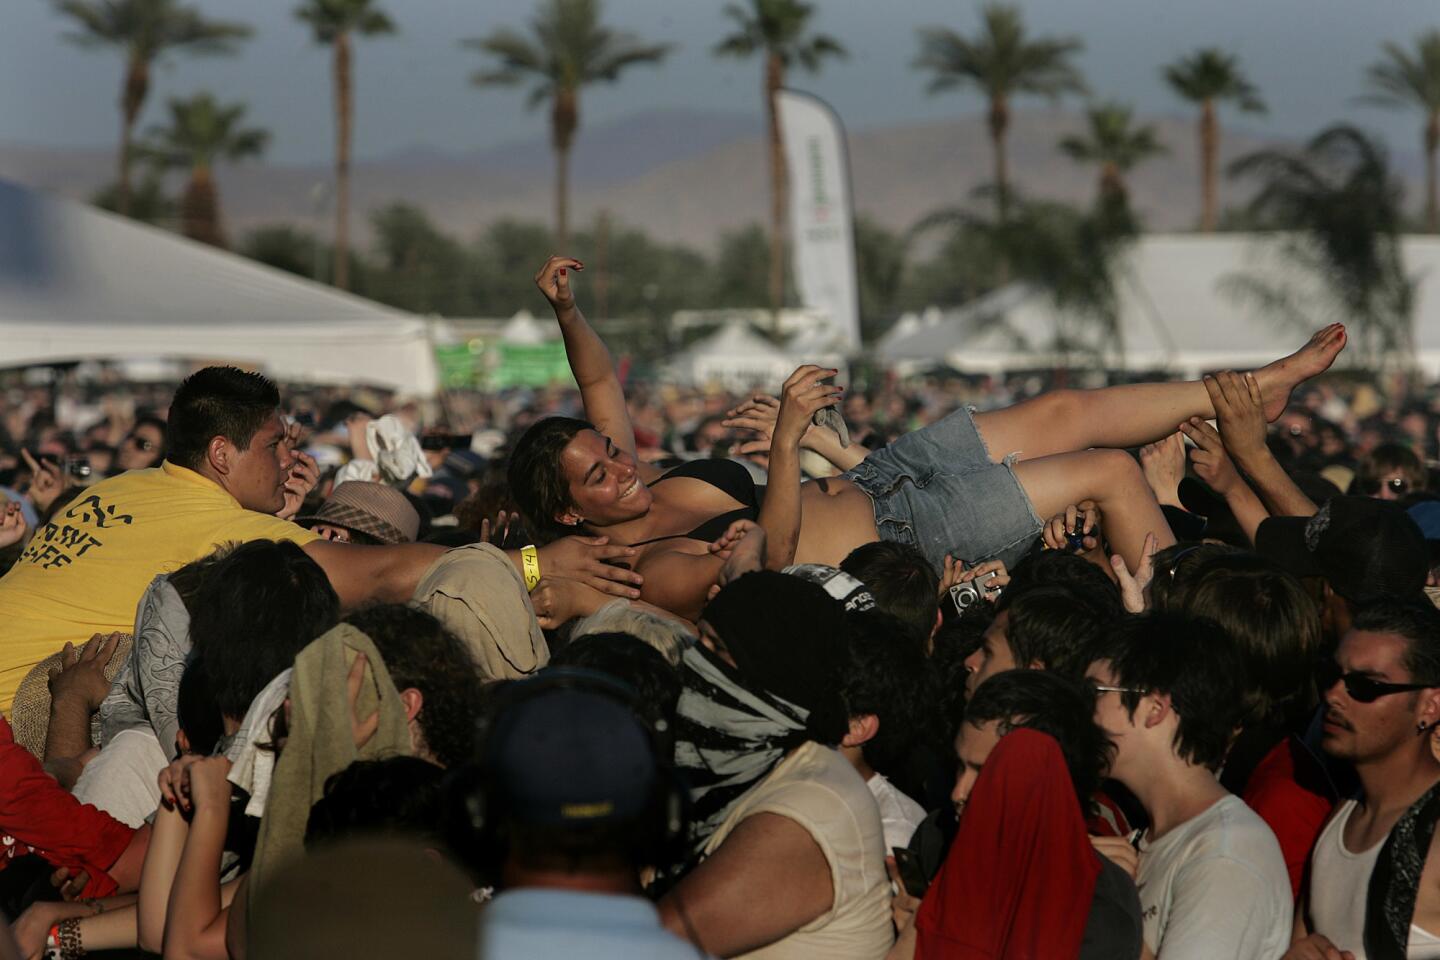 A fan is pulled from the crowd during the Arcade Fire performance, 2007.